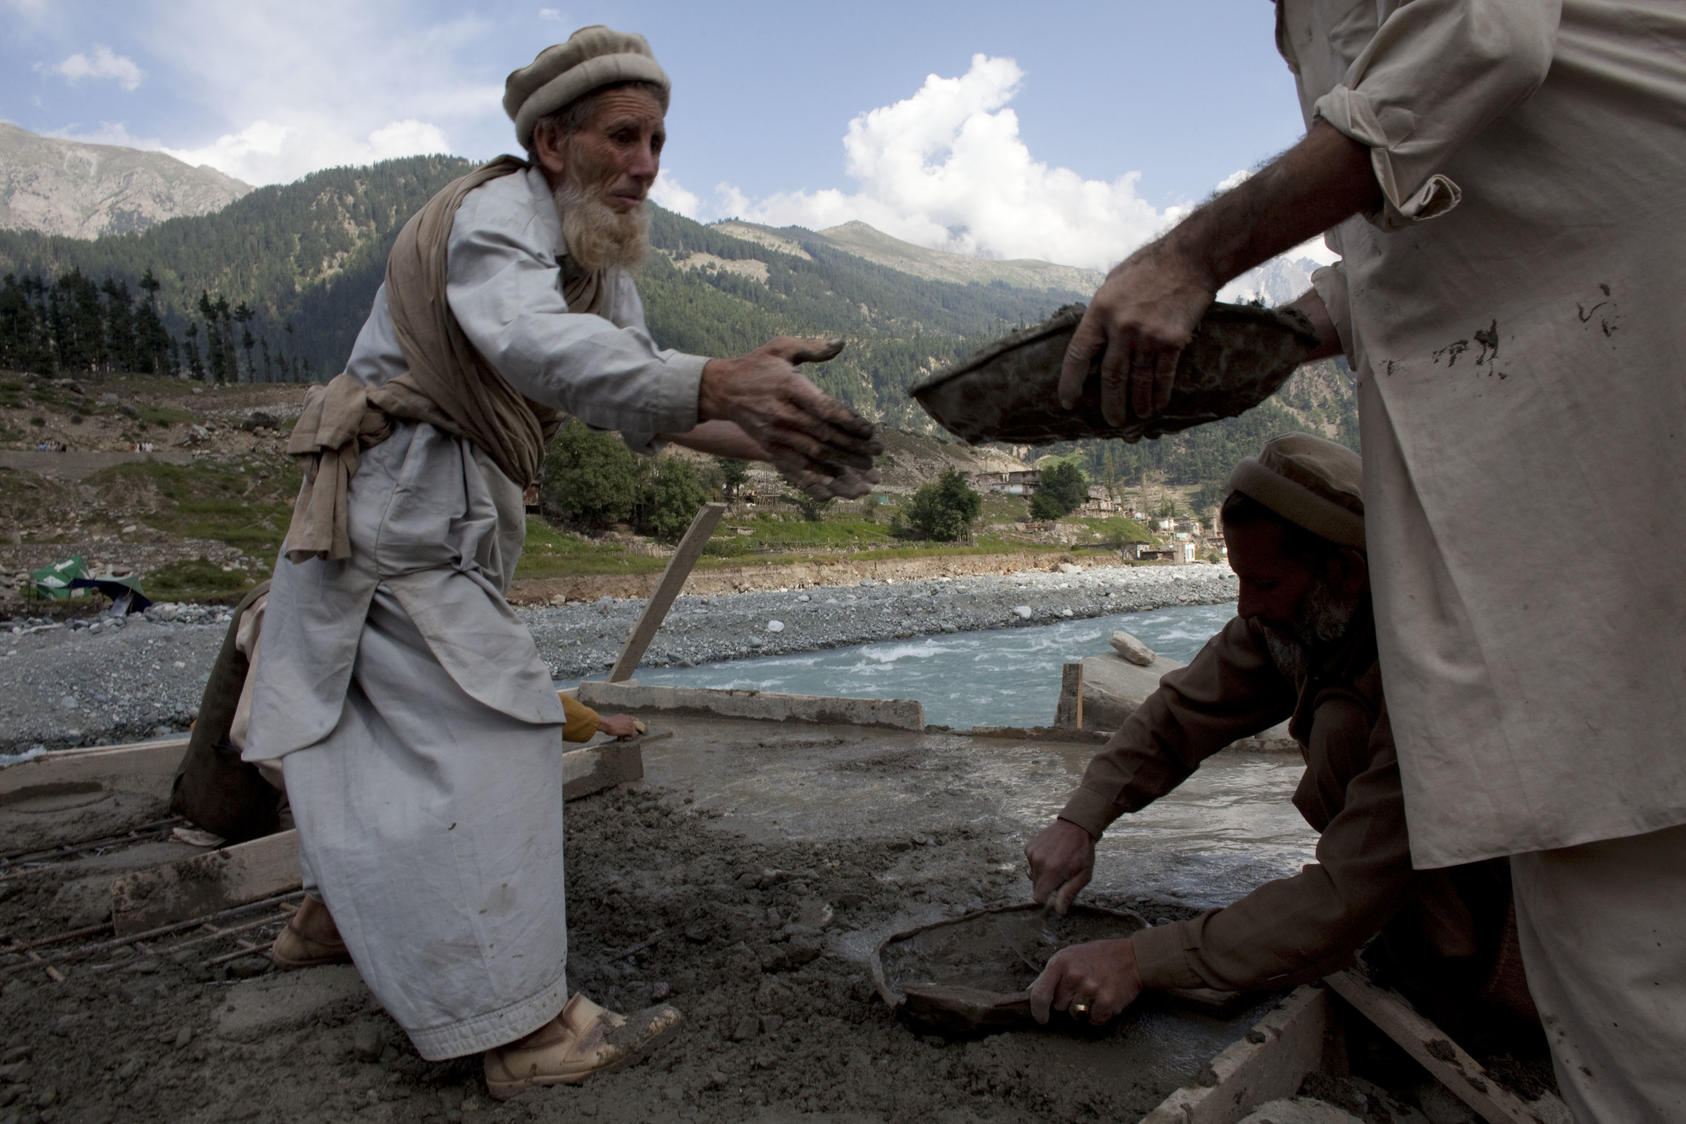 Pakistani men work to rebuild a bridge over a river in Kalam, a village in the Swat Valley formerly used by the Taliban, in Pakistan, Sept. 4, 2010. After scathing criticism that they were unprepared for the disaster and inept in their initial response, government officials, ministers and even President Asif Ali Zardari are crisscrossing flood-affected areas of the country in a frantic effort to ease public anger and despair.